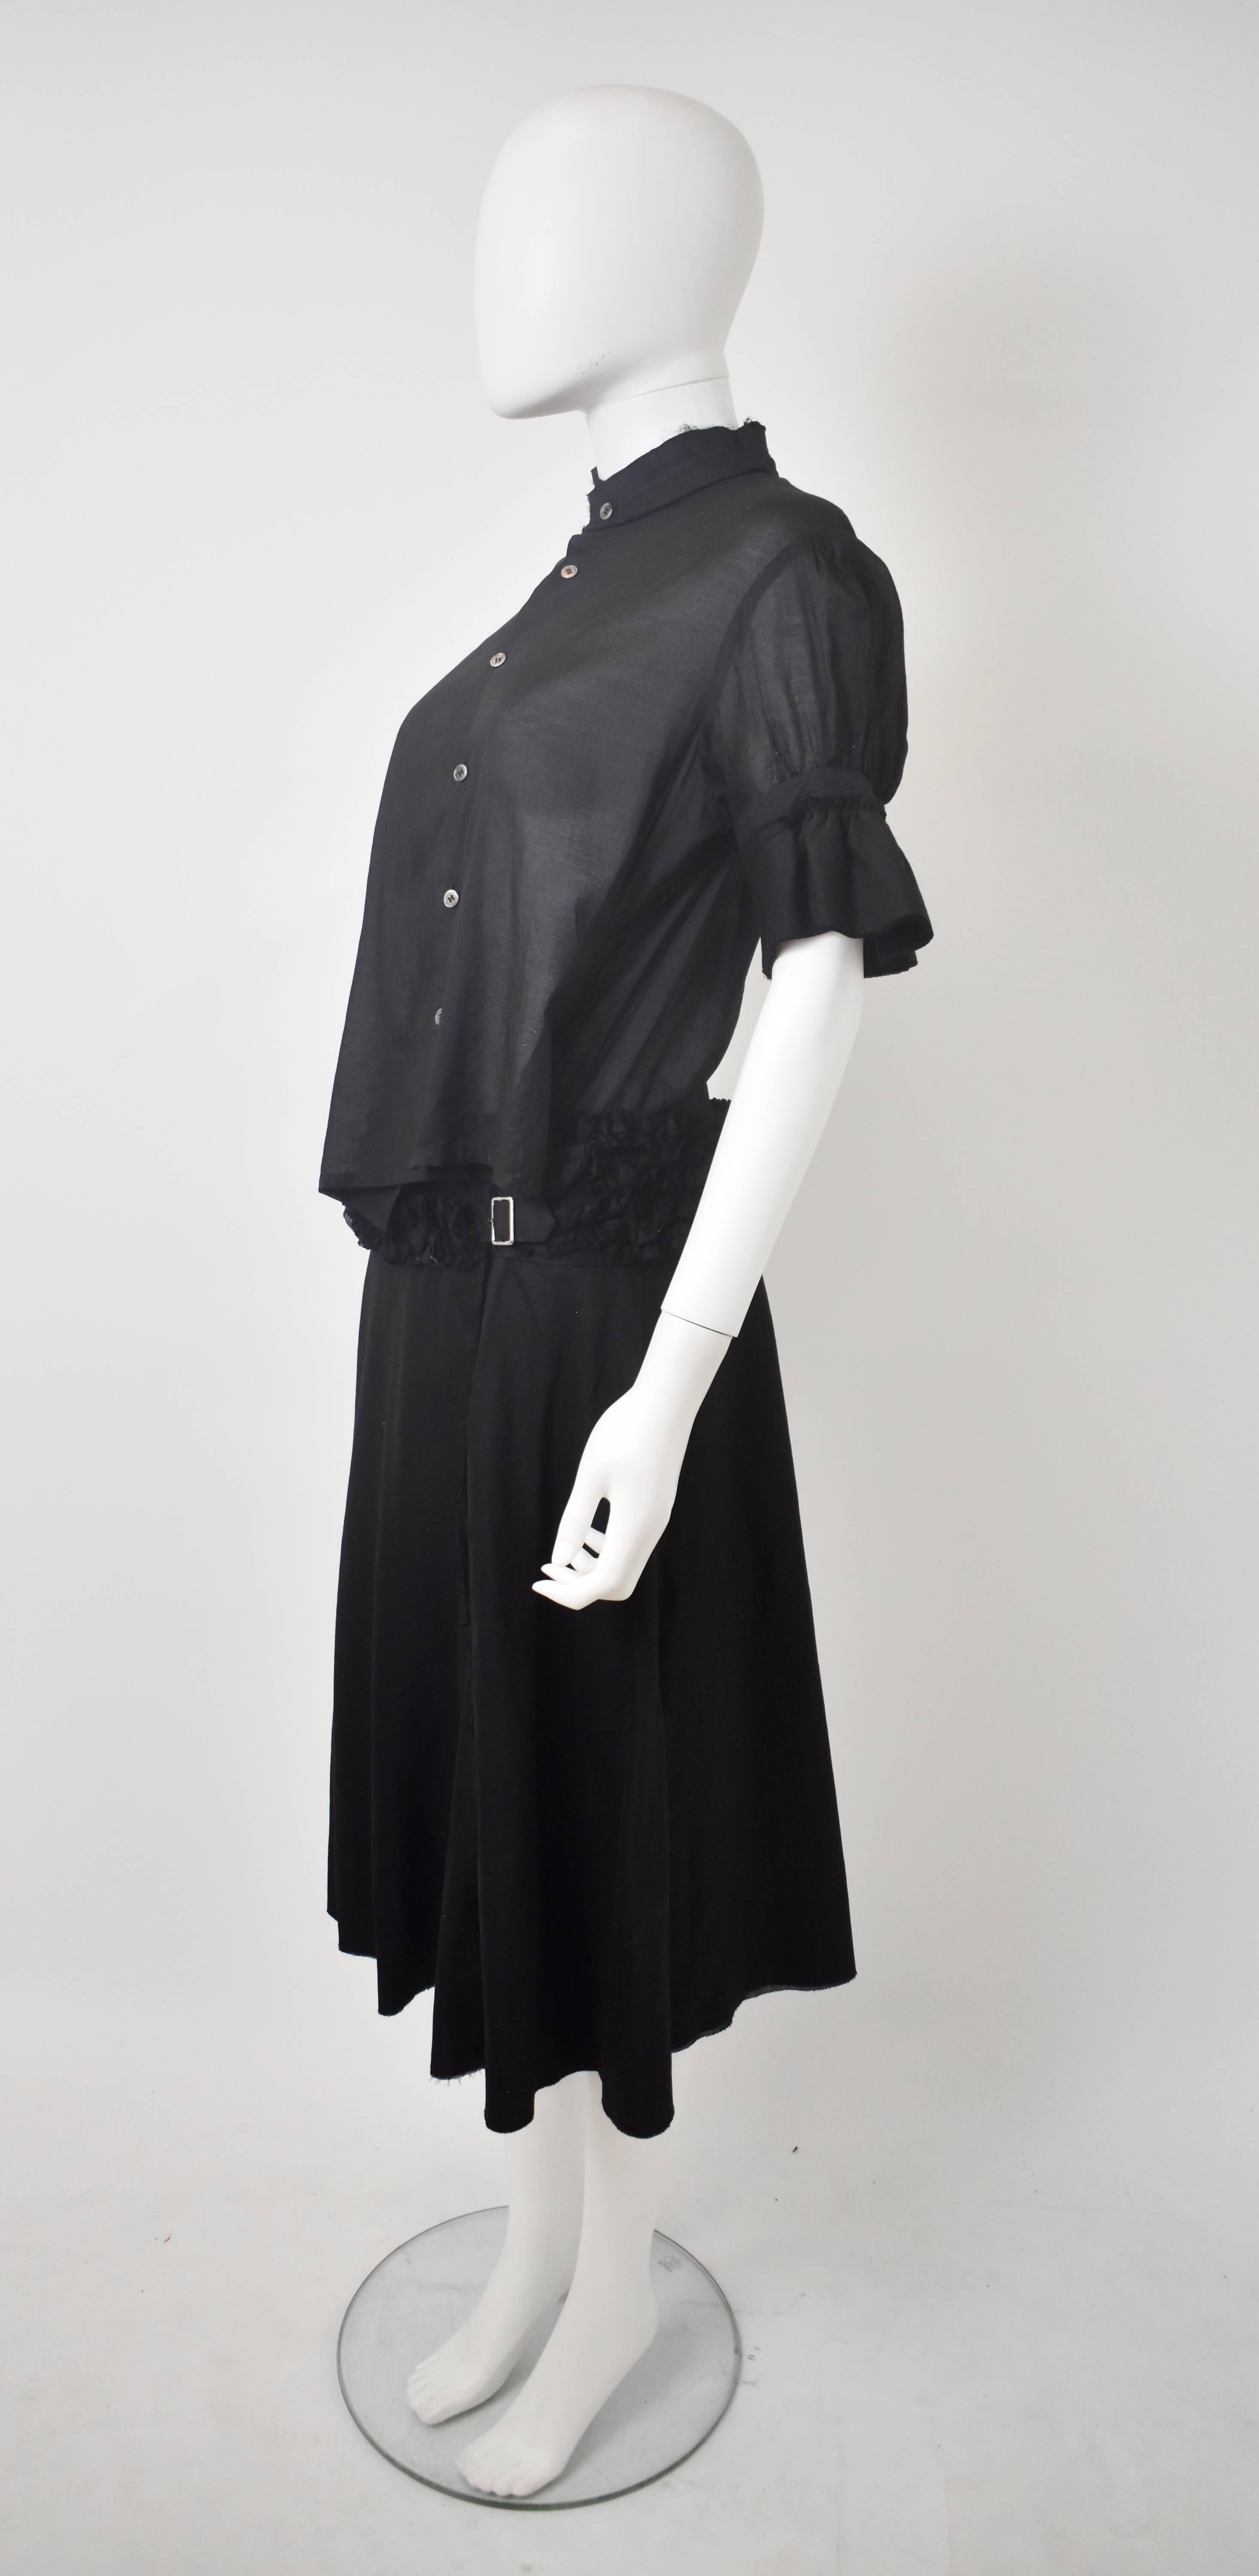 A 2007 Comme des Garcons Tricot black one-piece dress constructed from a short-sleeve shirt and Kilt skirt. The shirt section of the dress is made from a semi-sheer cotton with mandarin collar, button-up front and asymmetric dart details that create